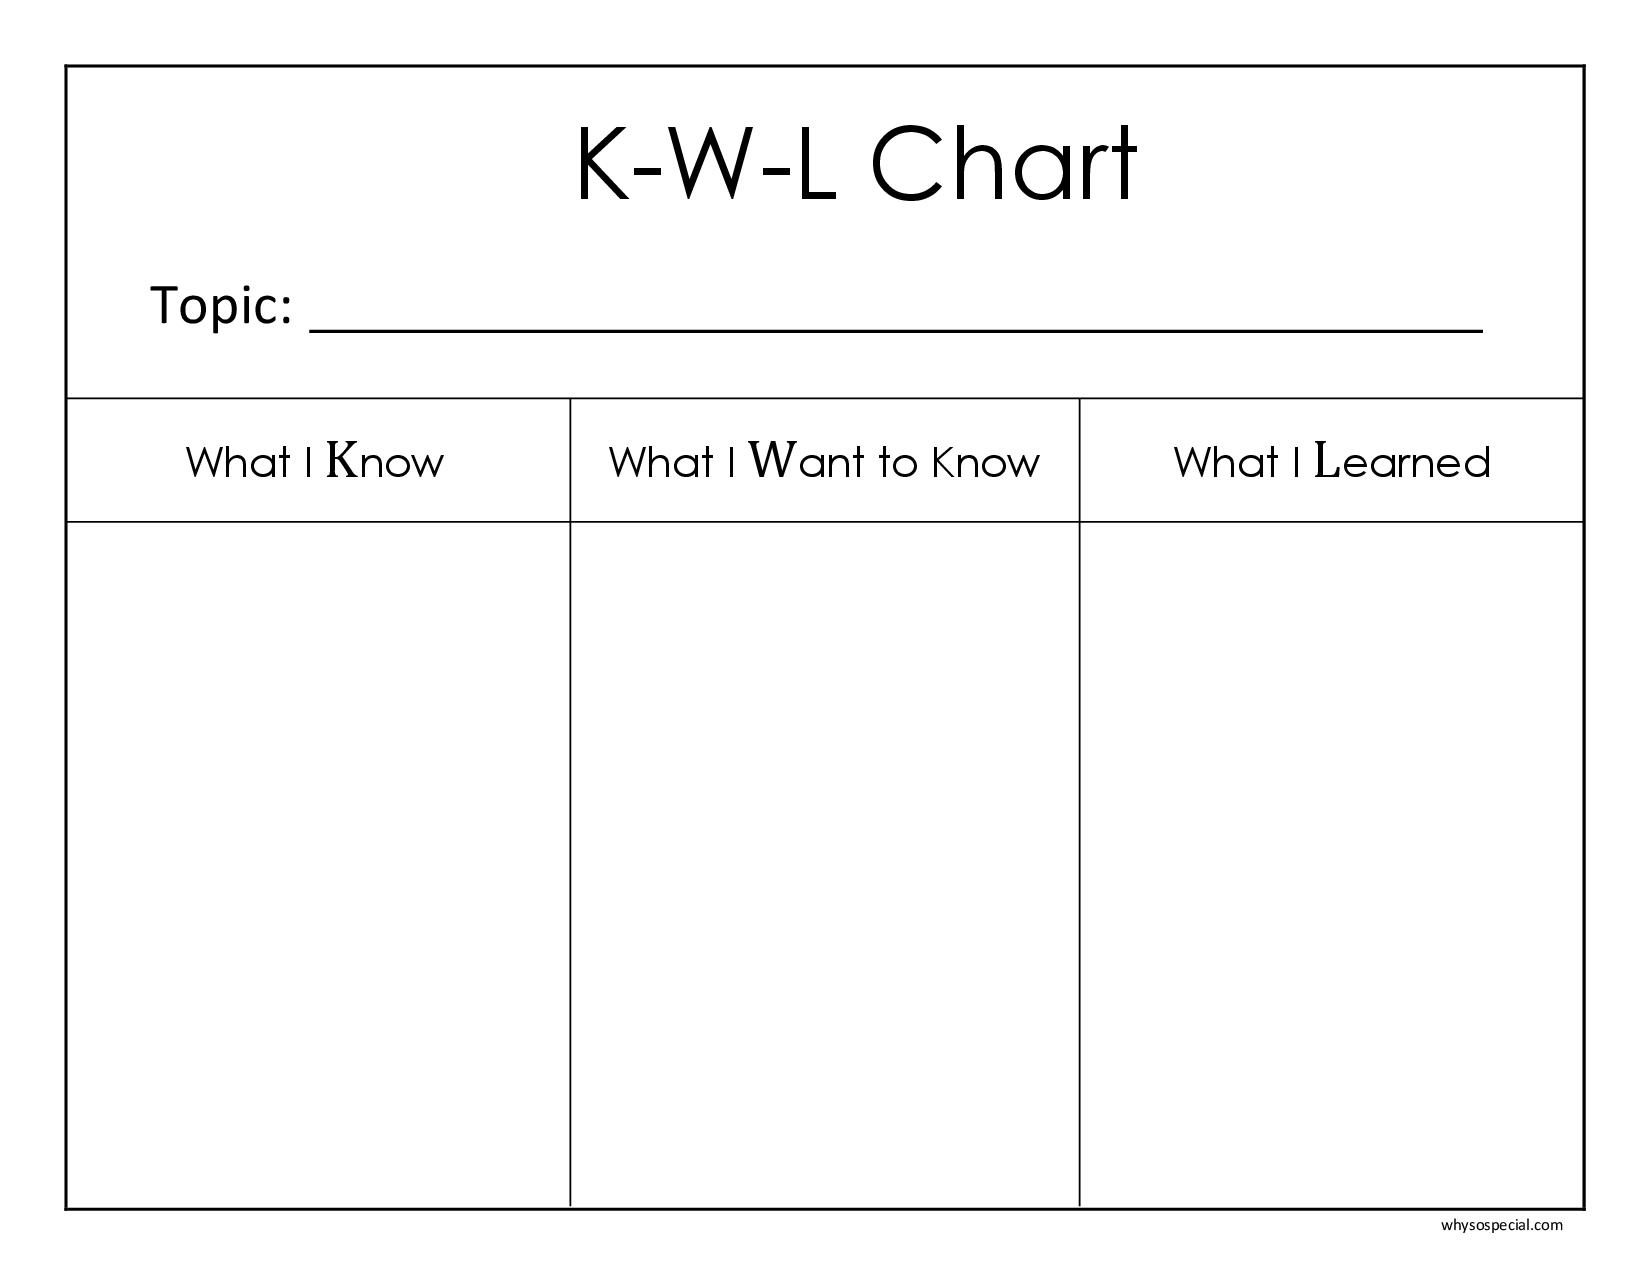 Space - London Islamic School With Regard To Kwl Chart Template Word Document